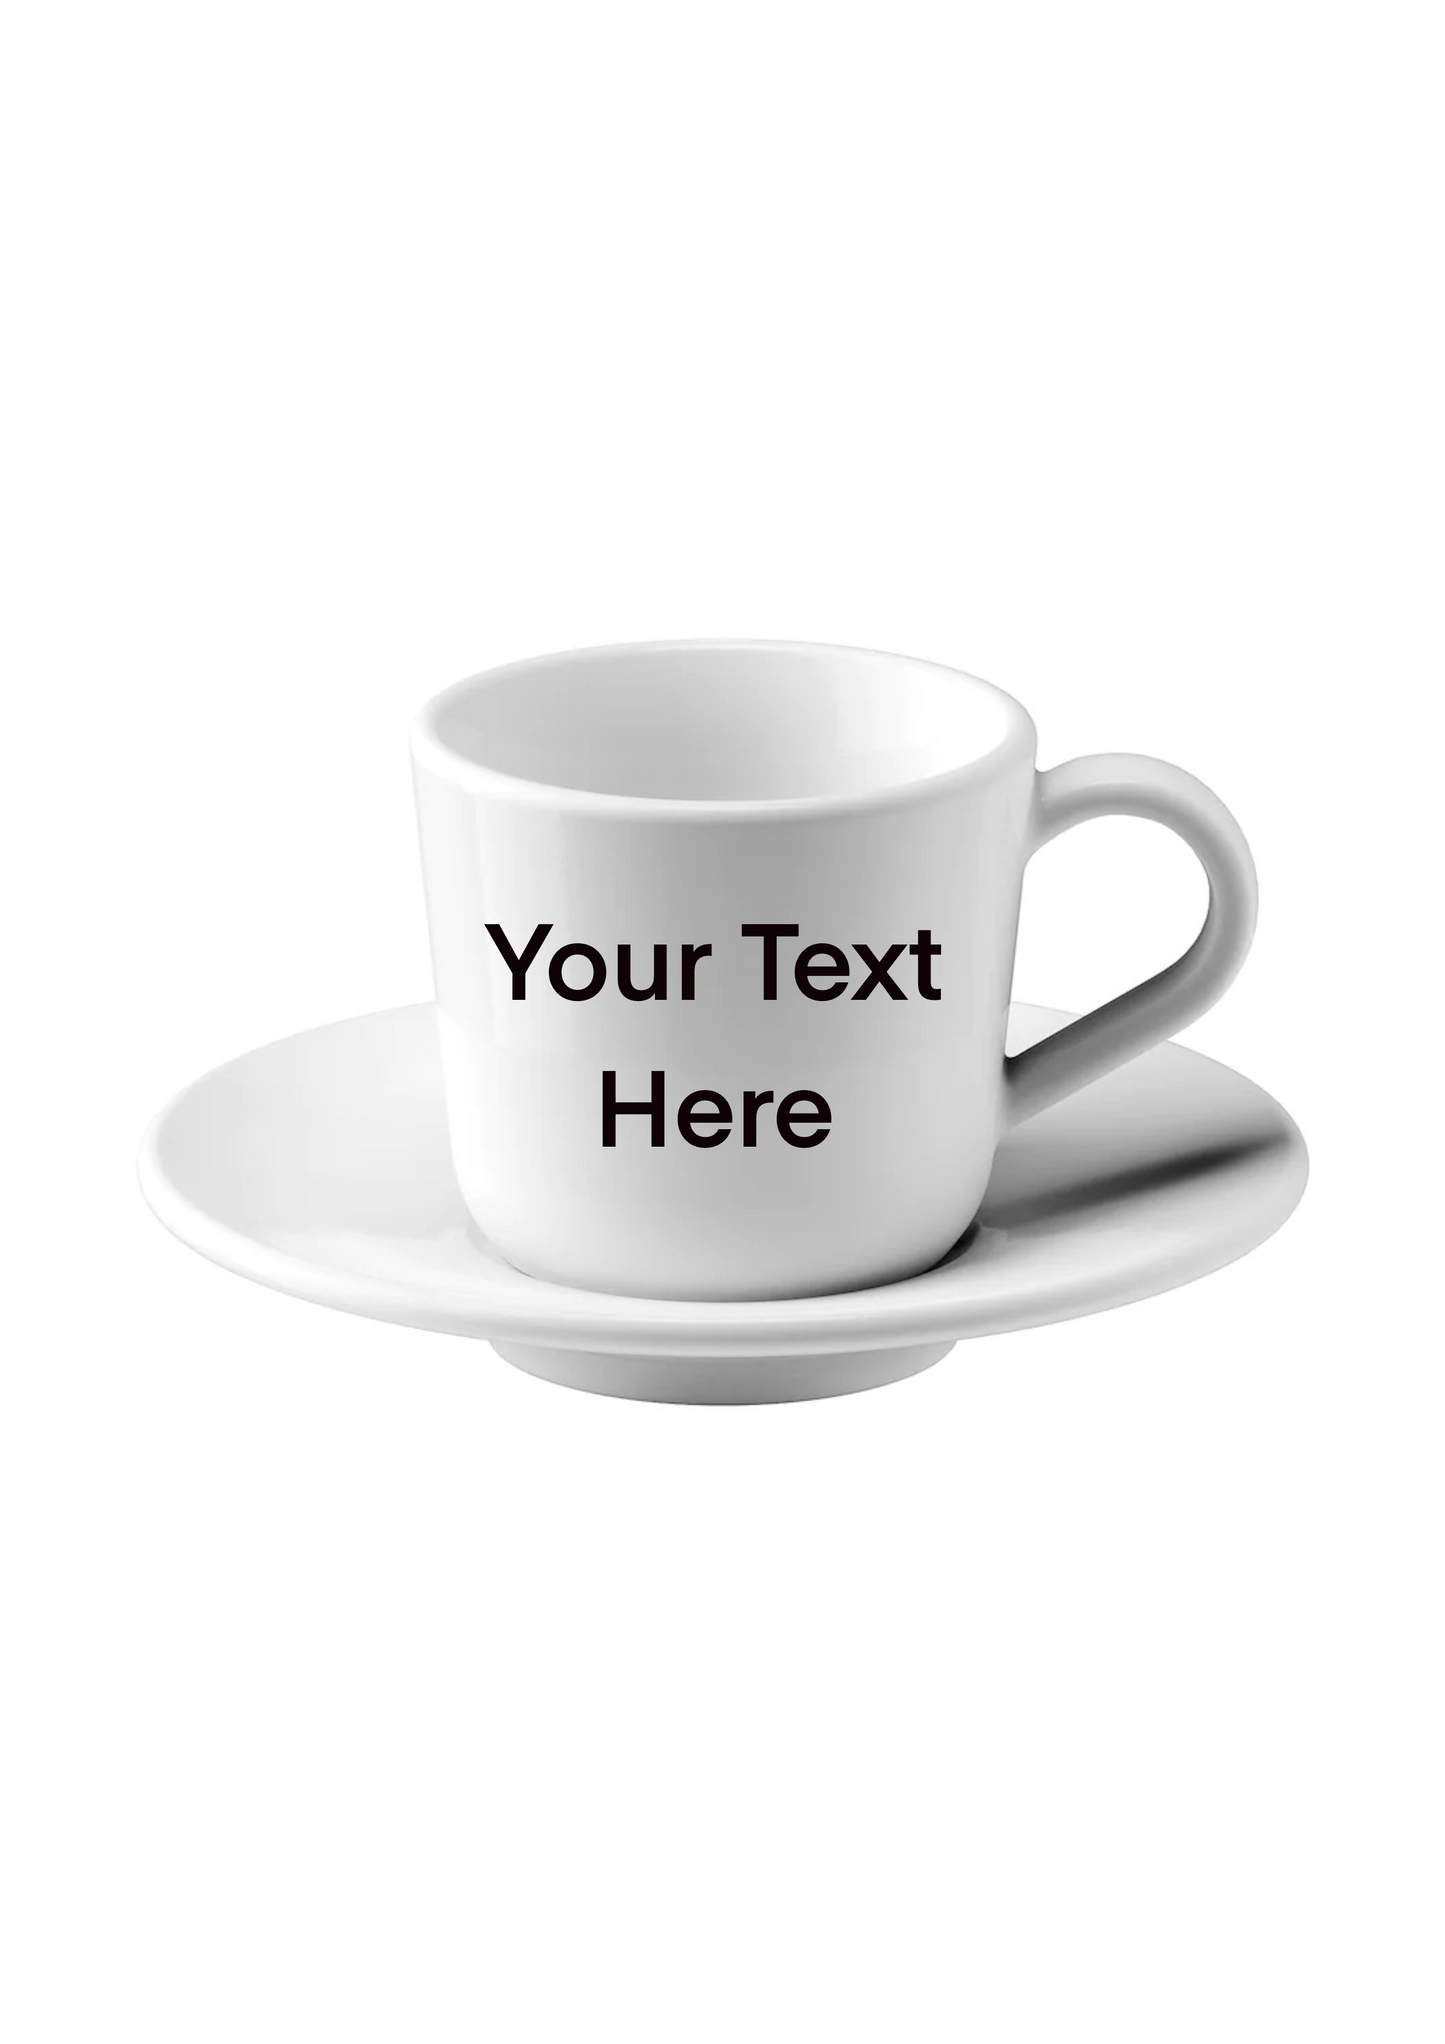 Customize Your Own Coffee/Espresso Cup With Saucer